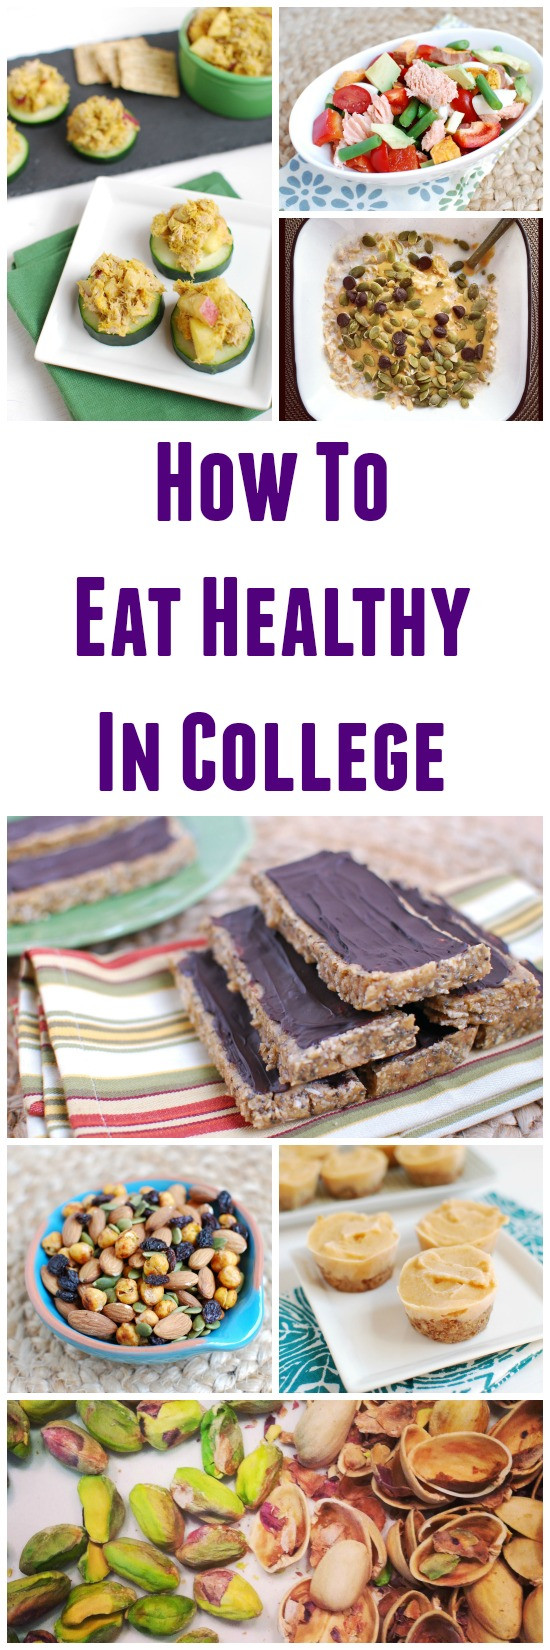 Healthy Snacks For College Students
 How to Eat Healthy in College